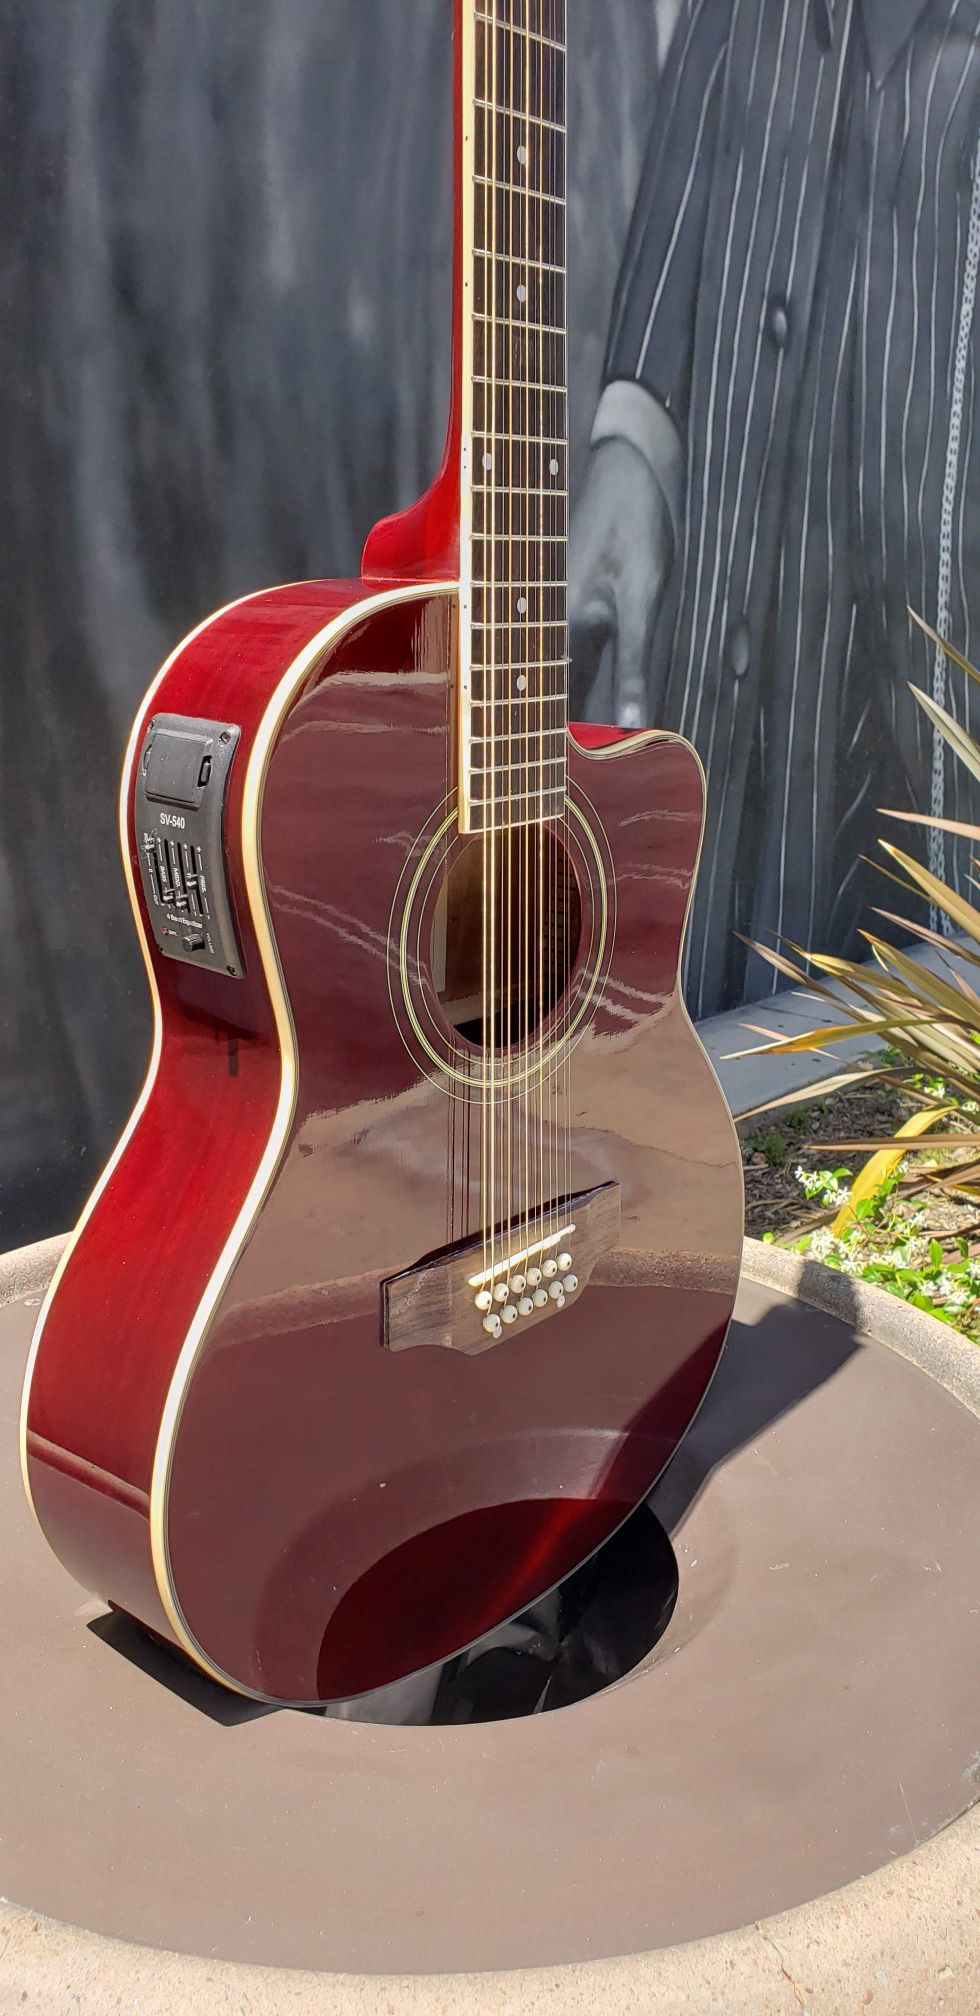 New 12 String Requinto Burgundy Cutaway Acoustic-Electric Thin Body Guitar